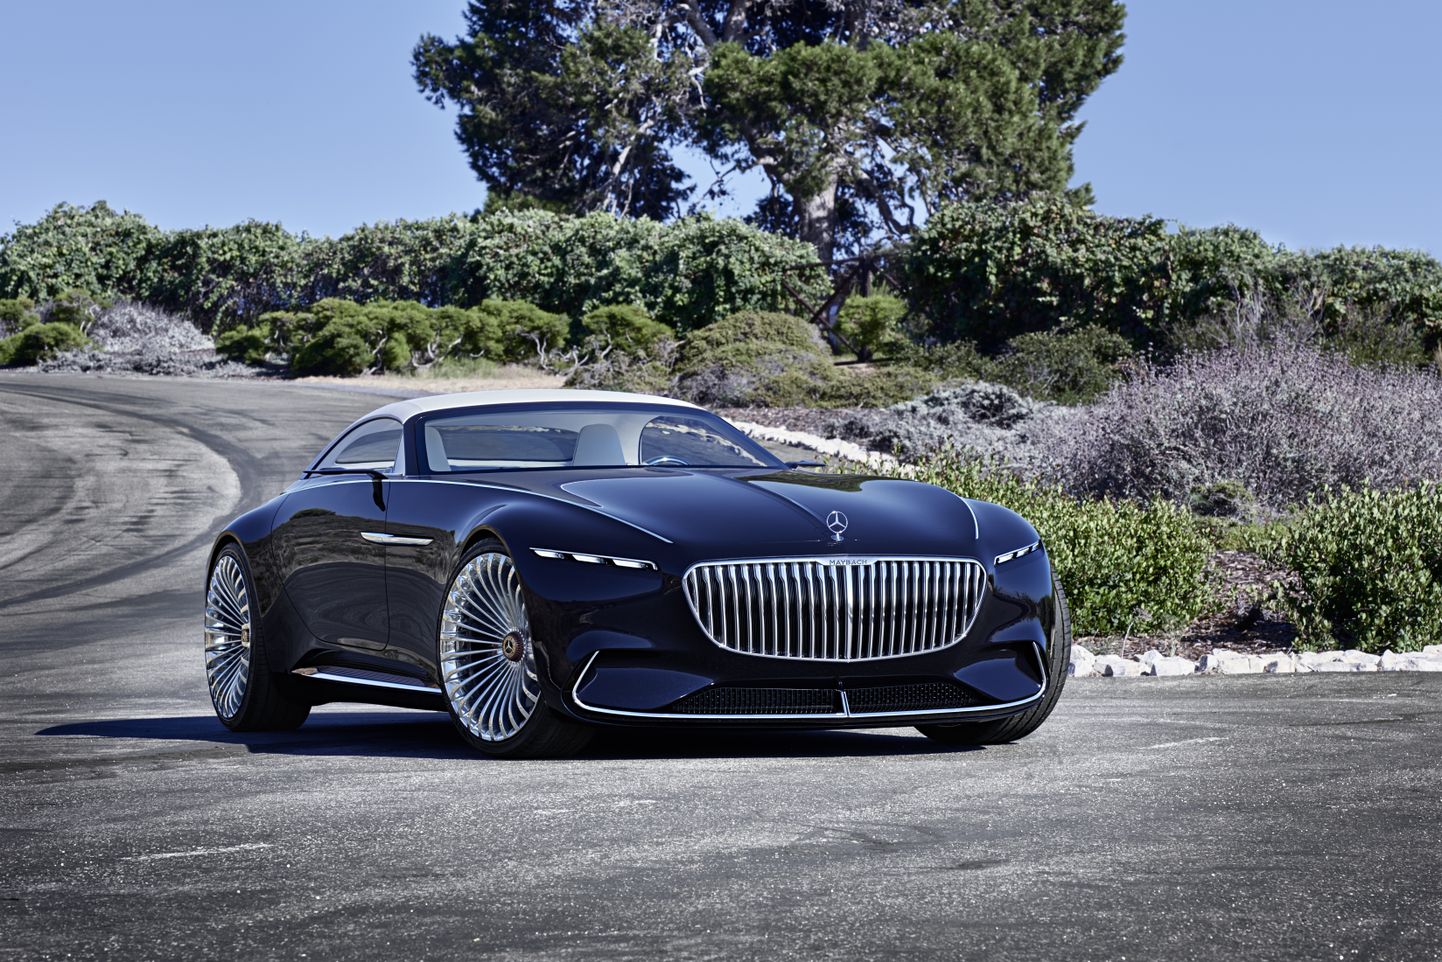 Vision Mercedes-Maybach 6 Coupe un Vision Mercedes-Maybach 6 Cabriolet